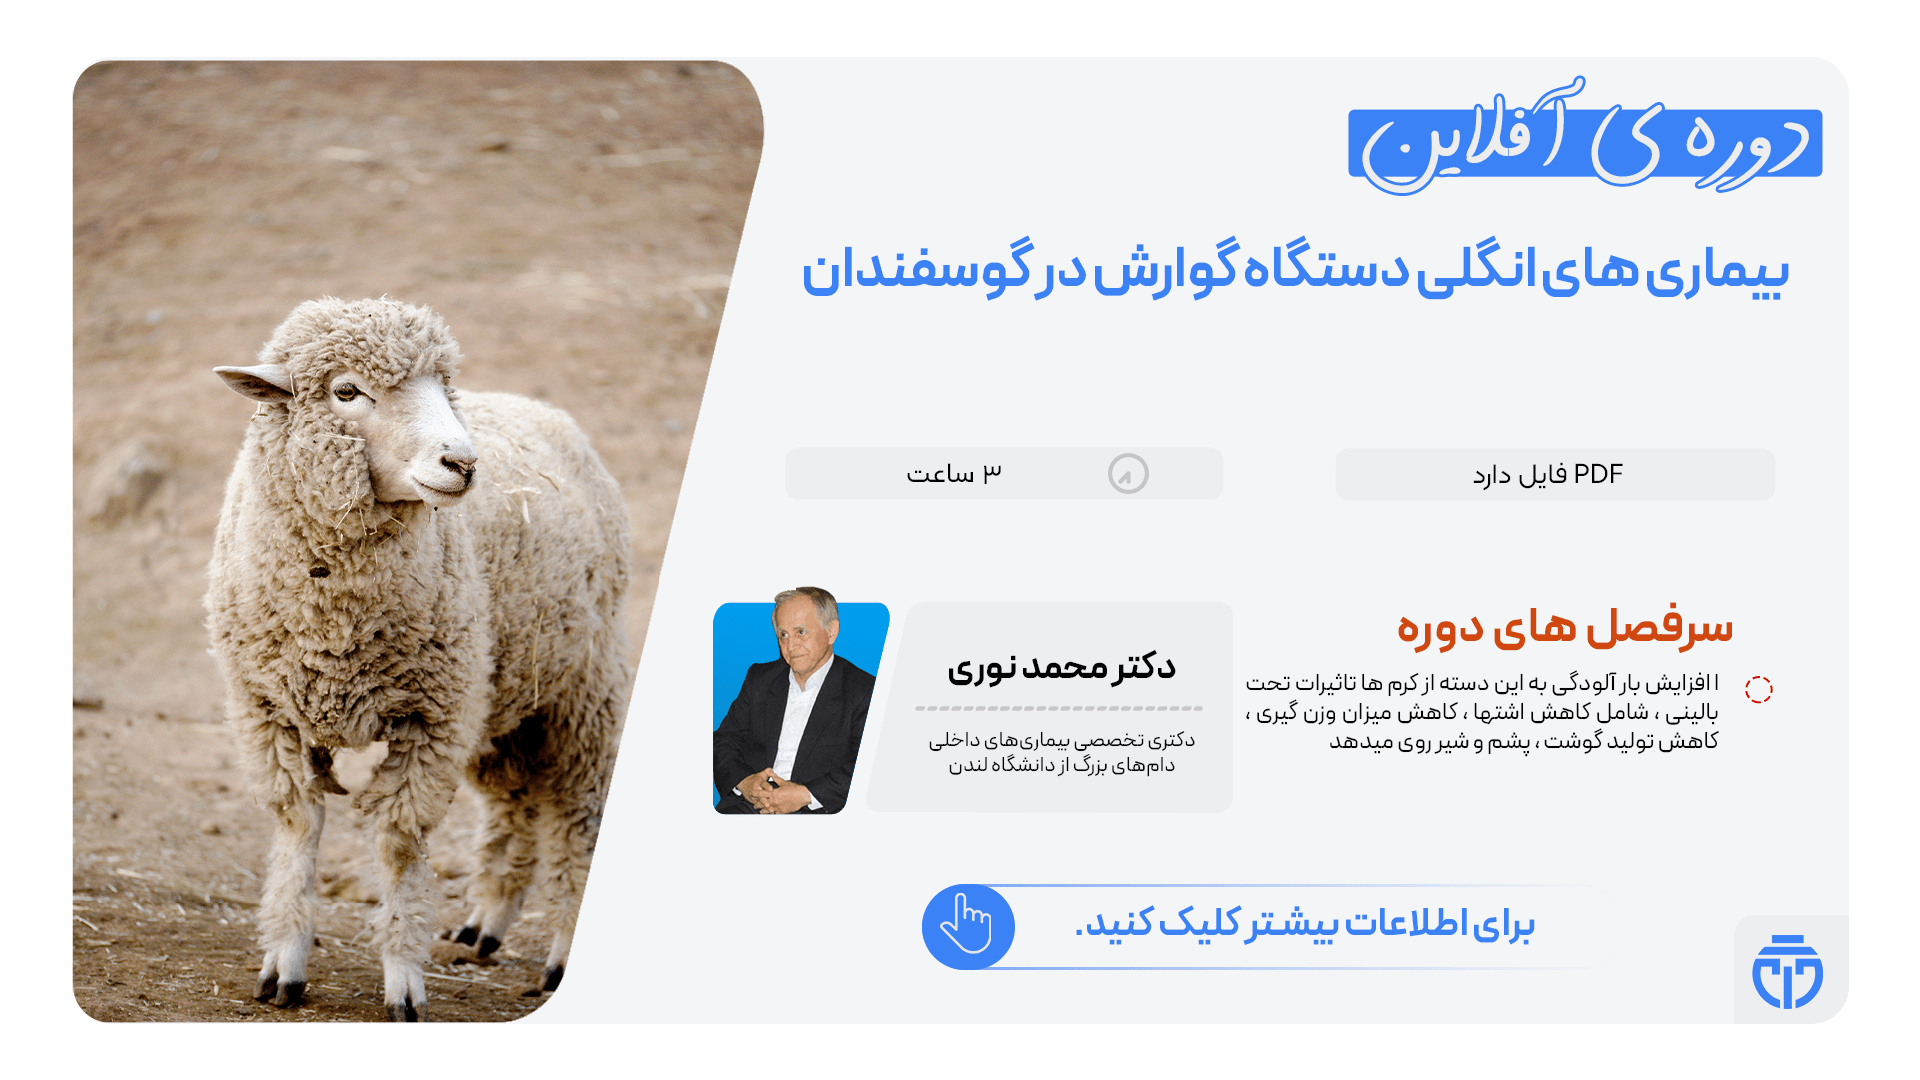 Gastrointestinal Parasitic Diseases in Sheep - Dr Mohamad Nouri